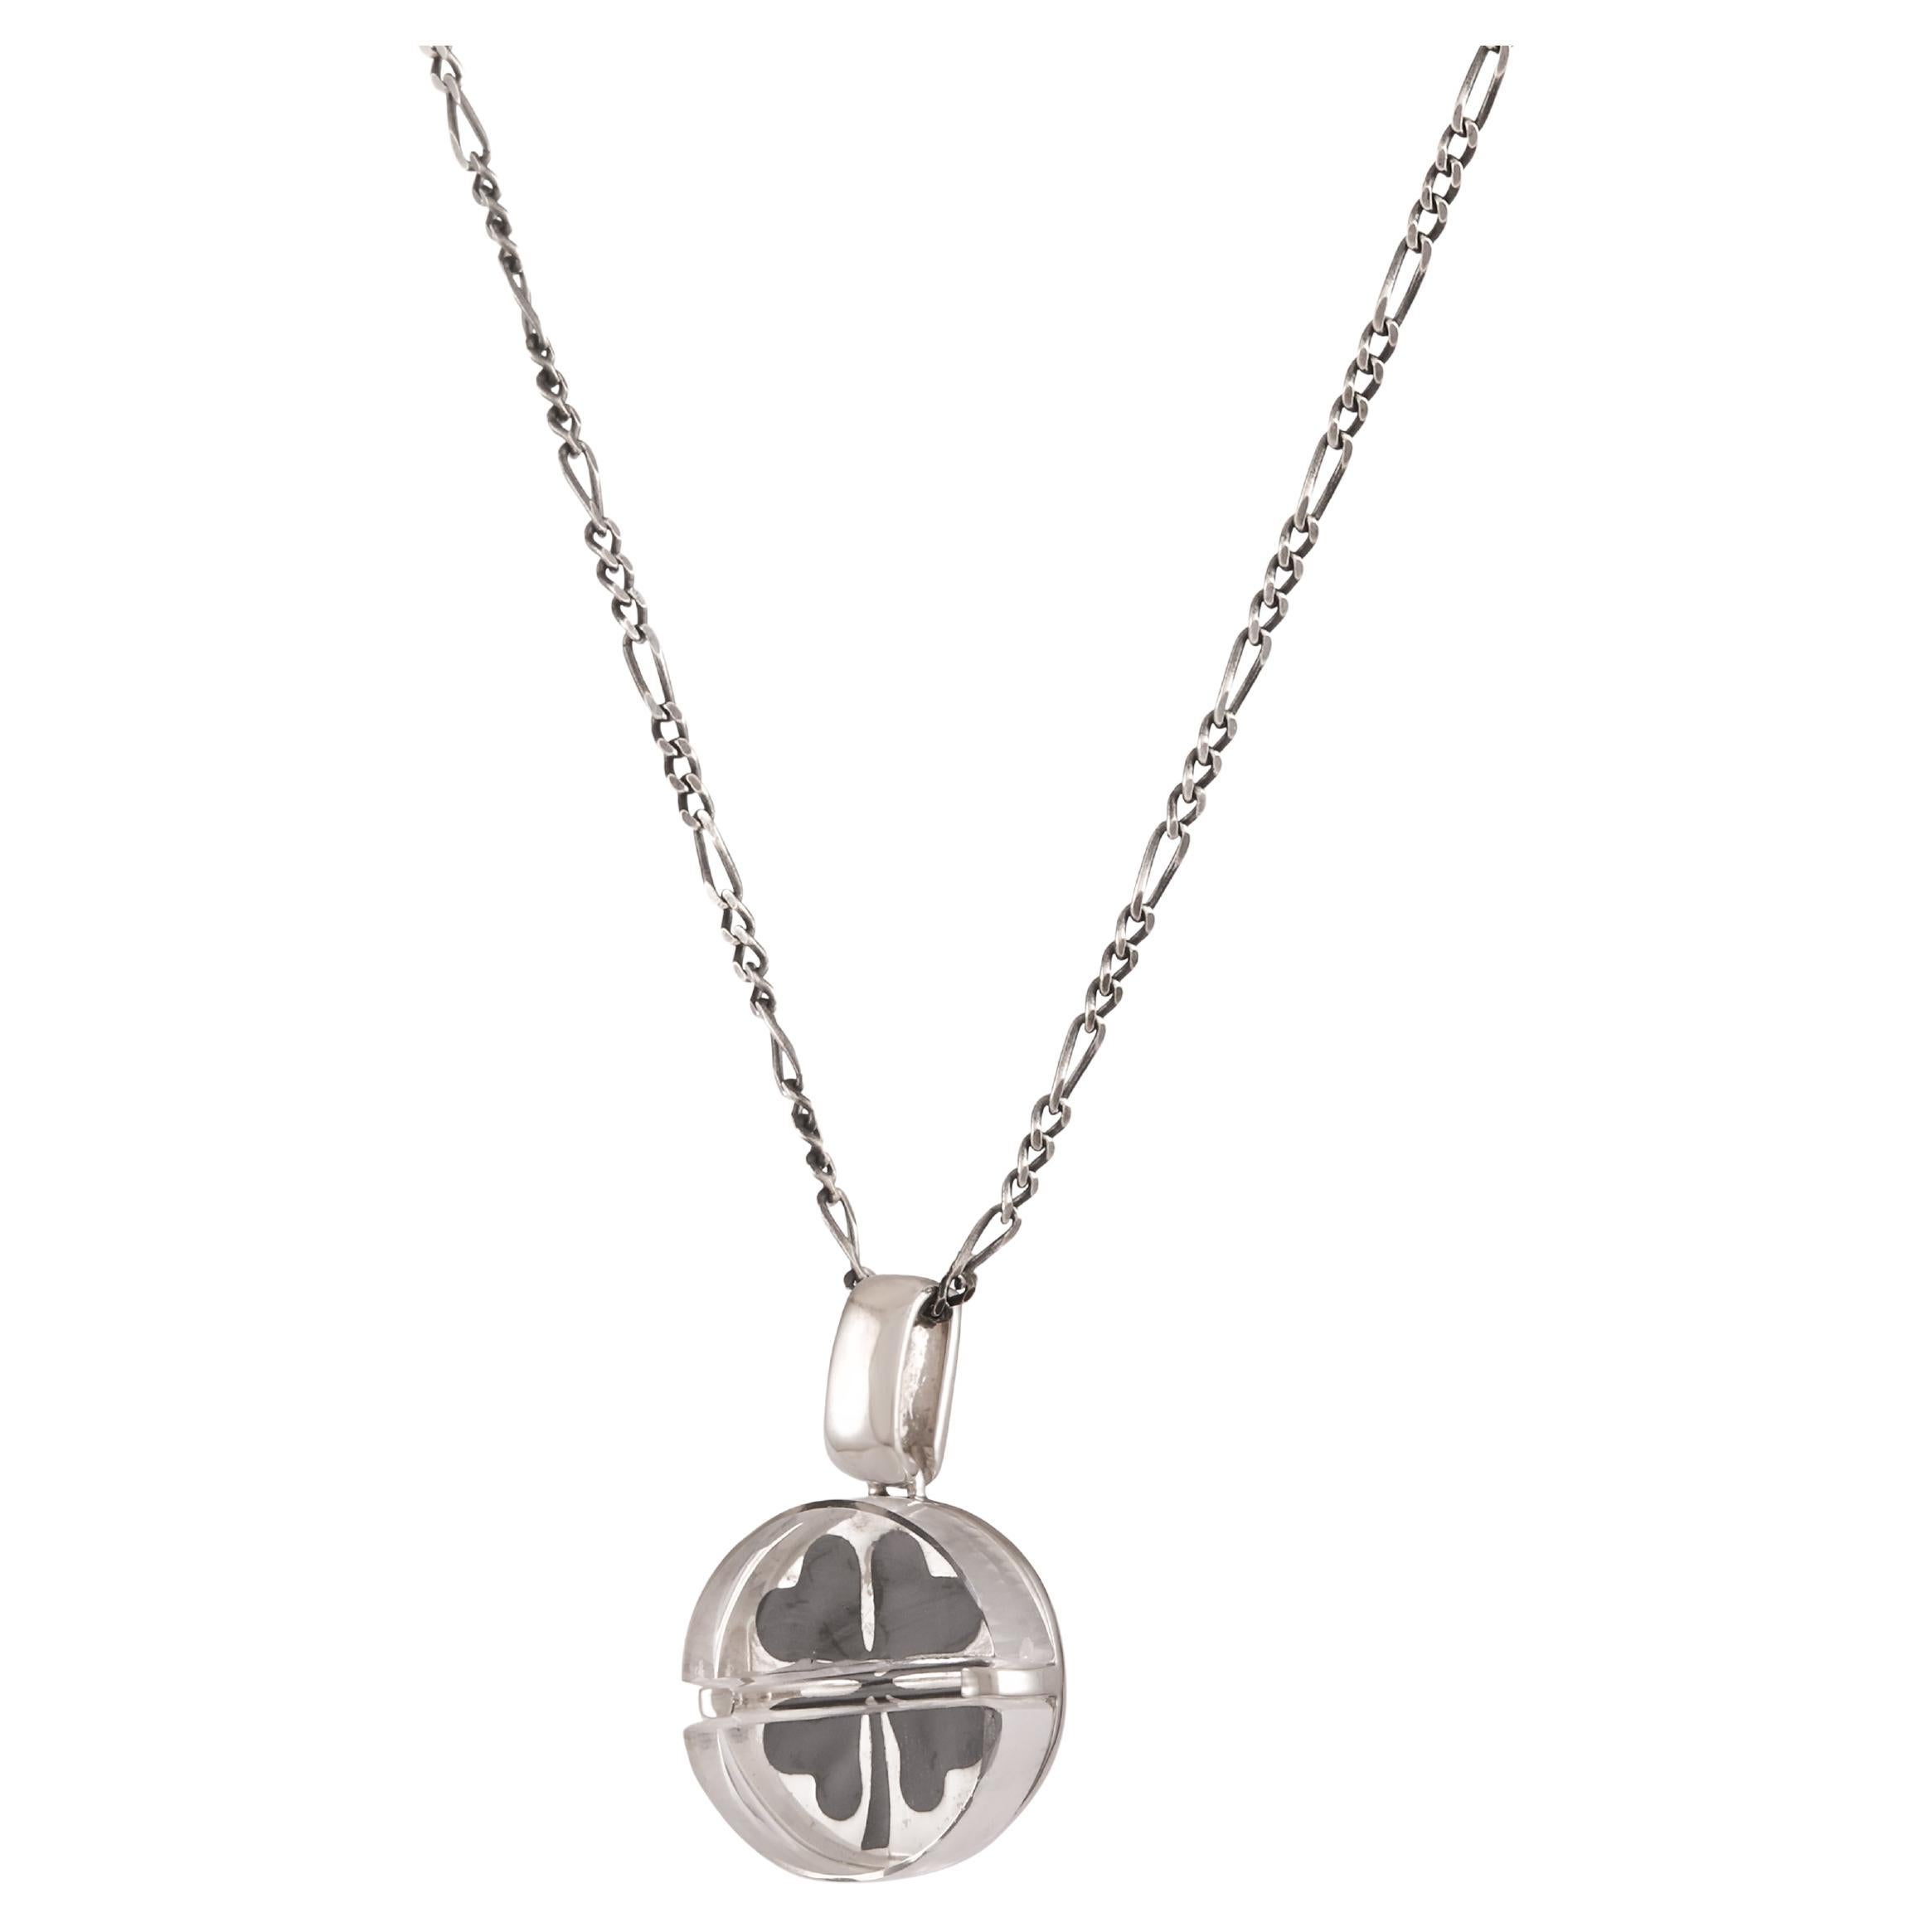 Tichu Luck Pill Pendant & Chain in Sterling Silver & Crystal in Silver Finish 